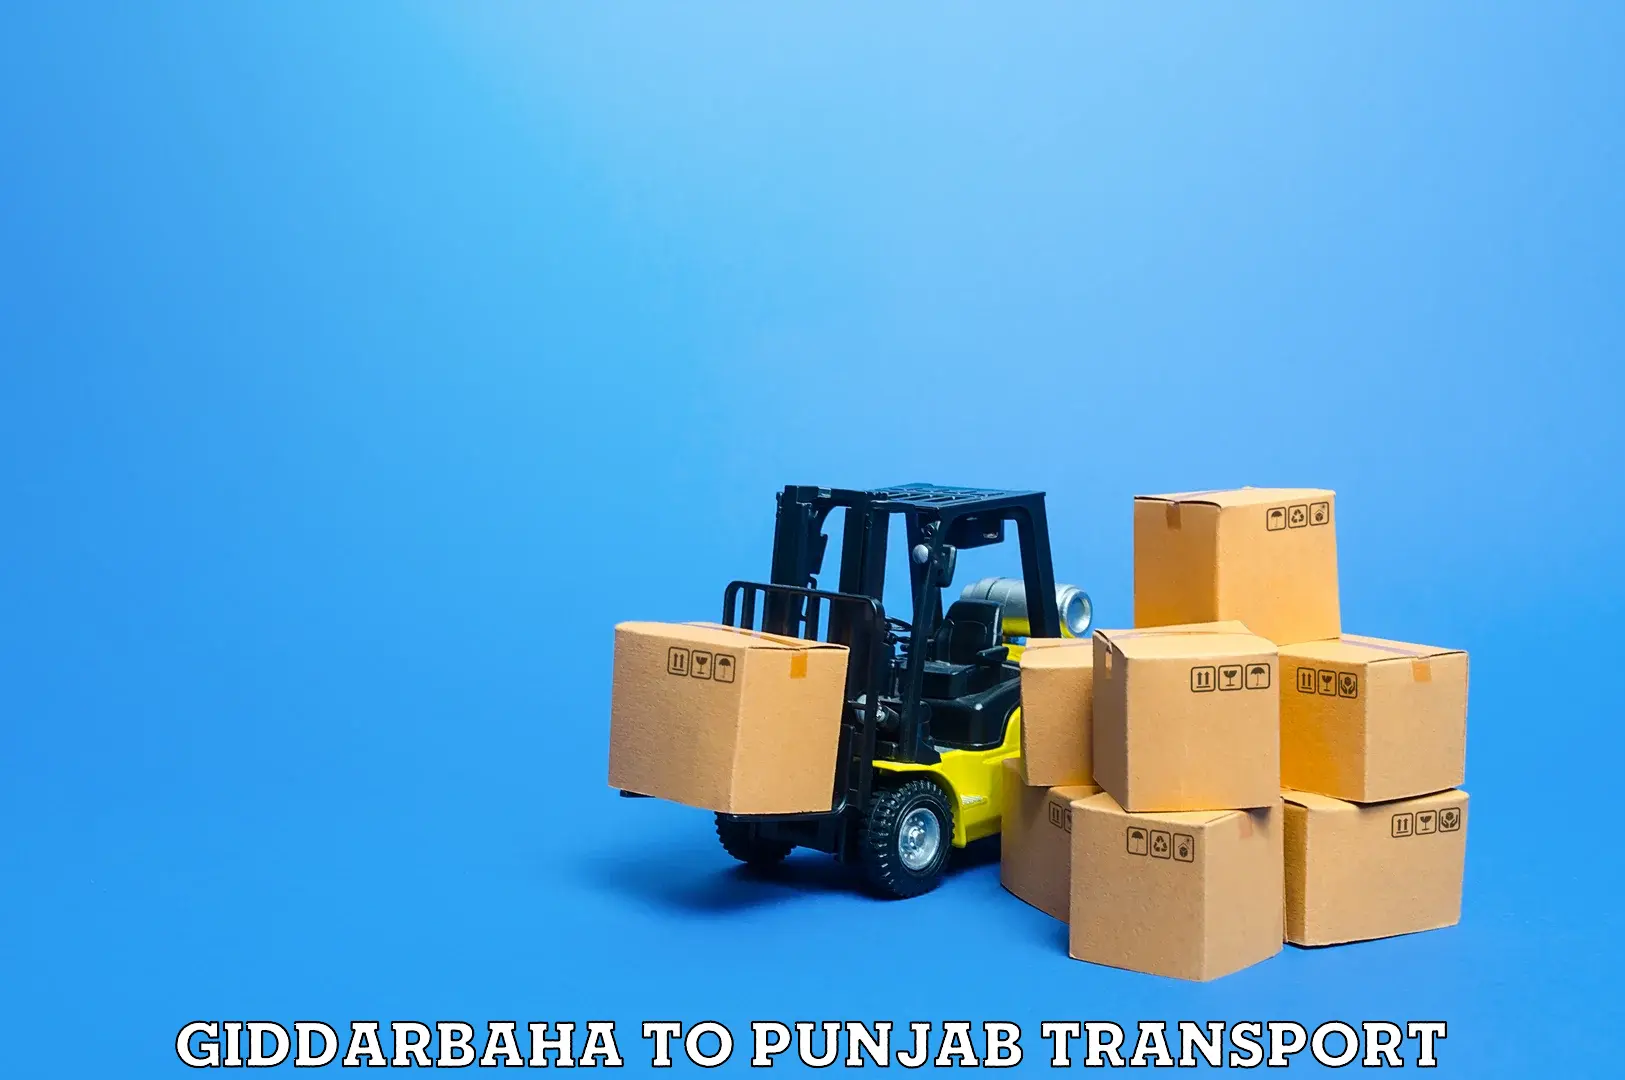 Goods delivery service Giddarbaha to Sultanpur Lodhi